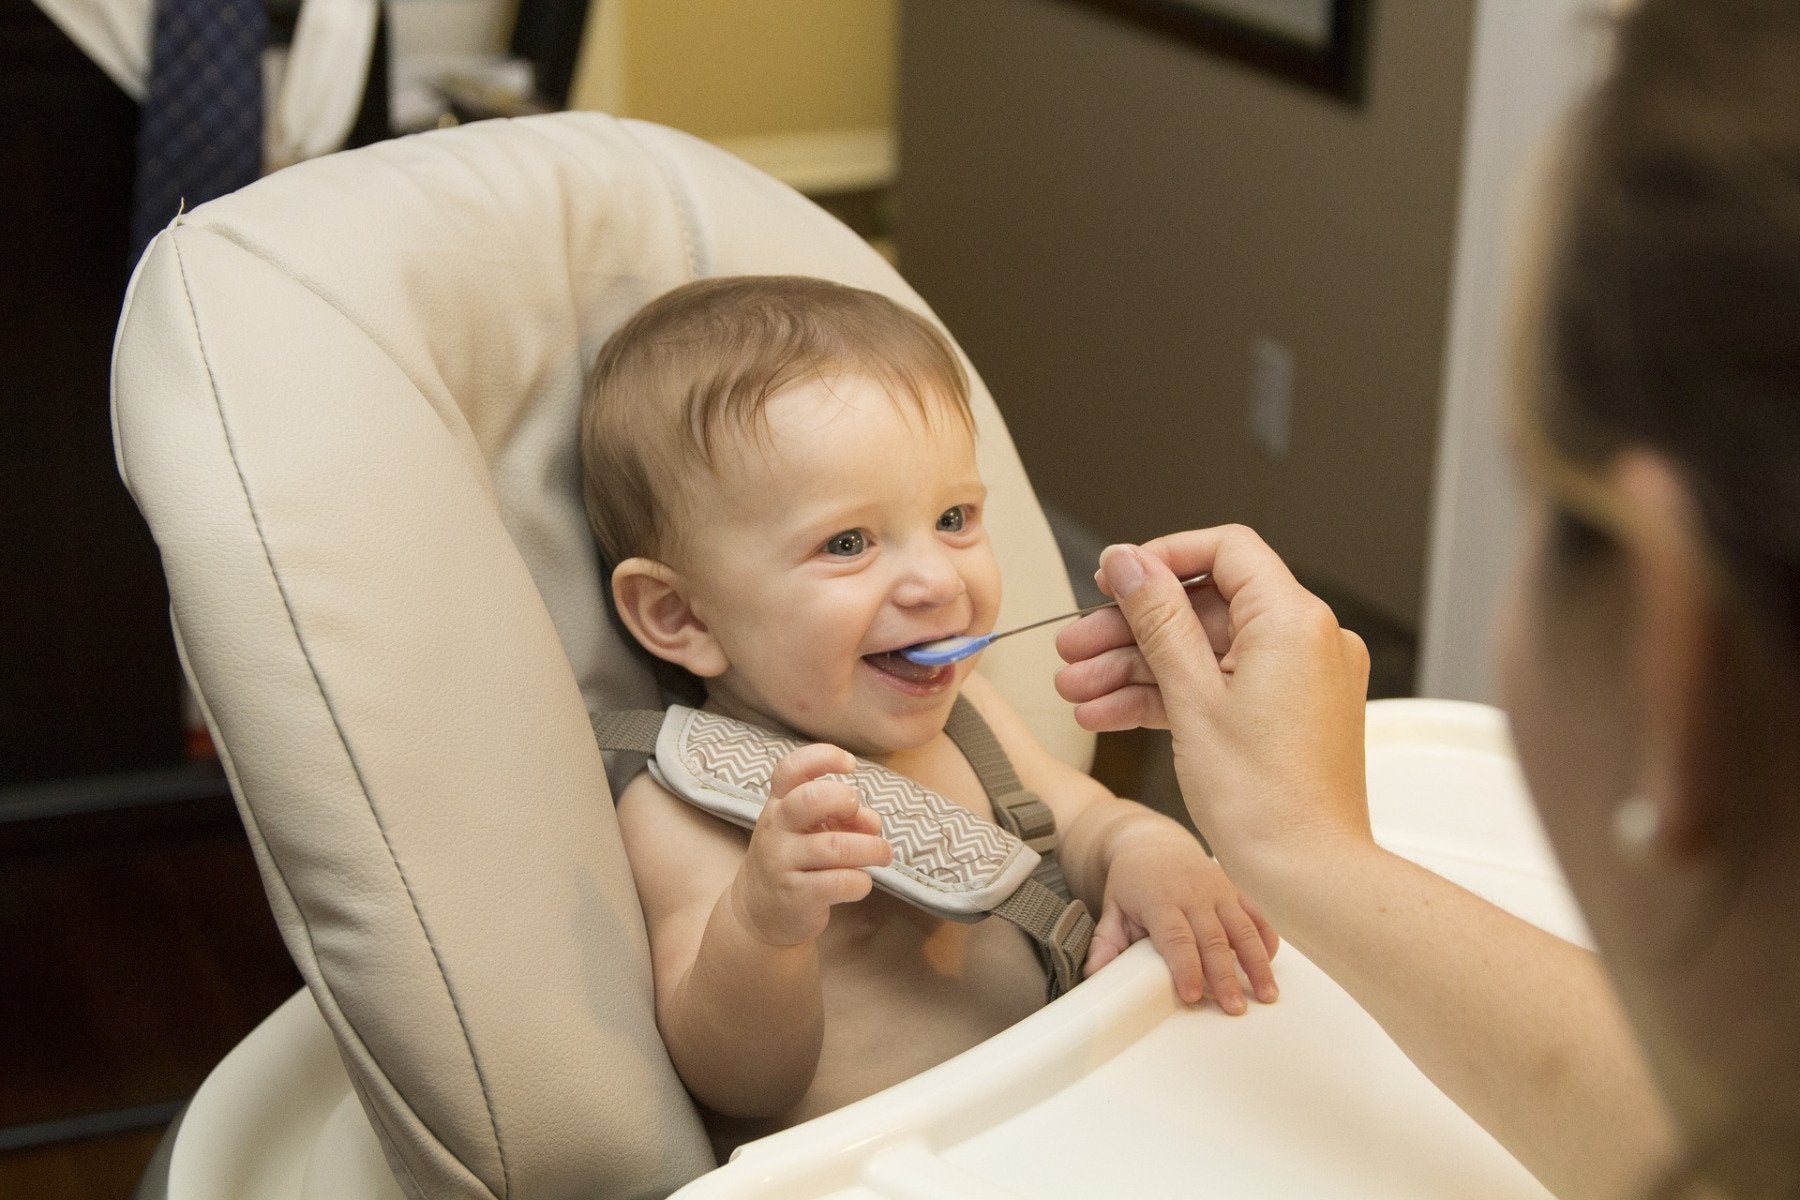 brush baby weaning tips with teeth wipes, baby toothbrush and infant teething toothpaste